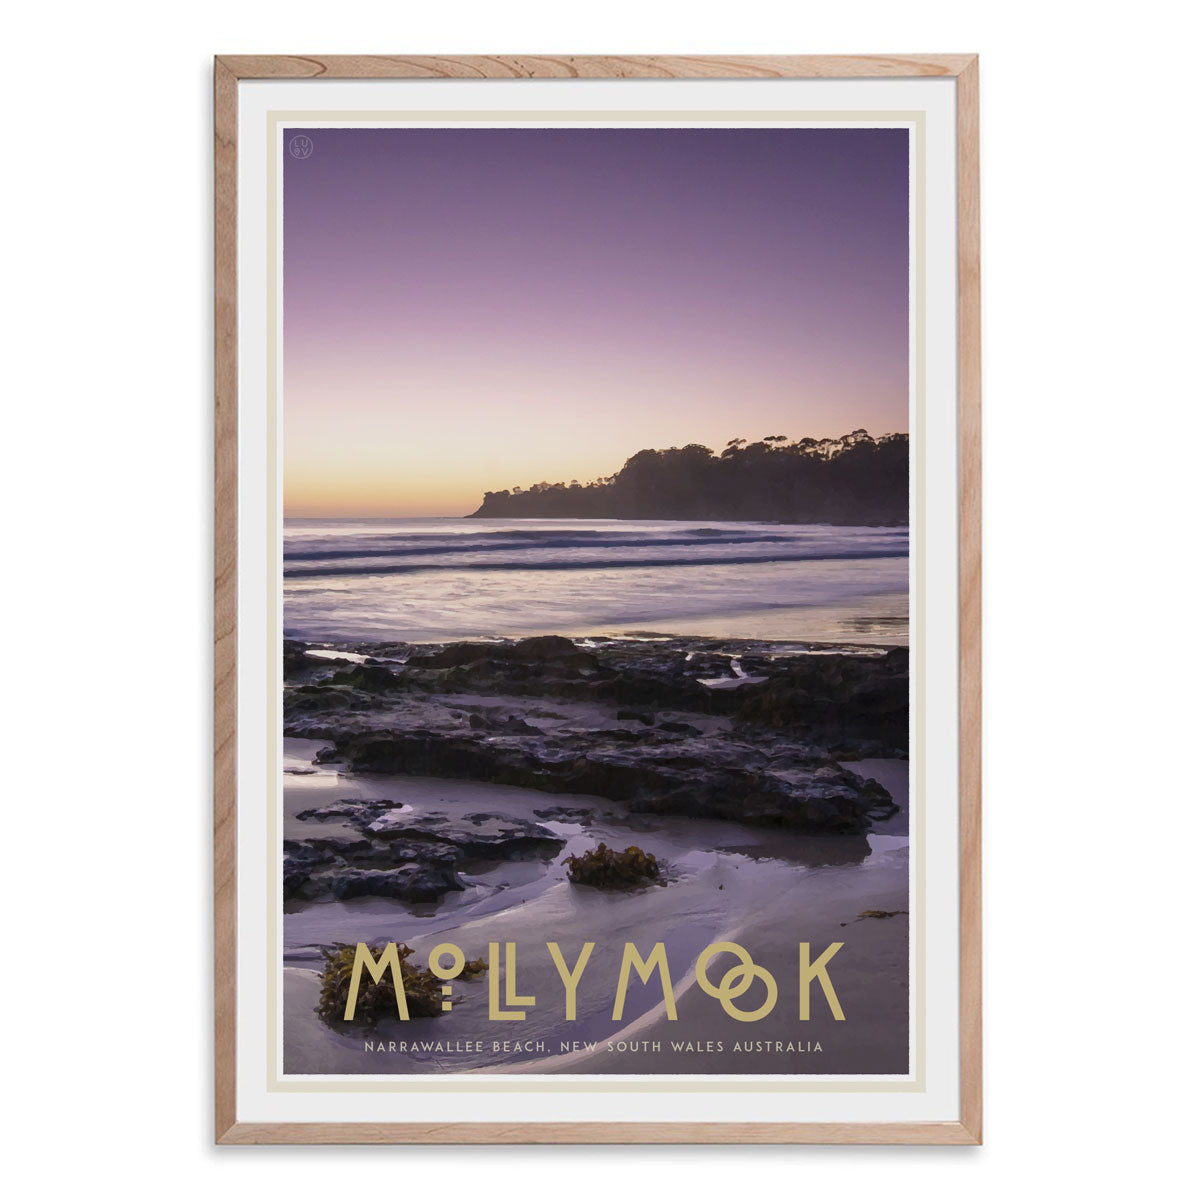 Mollymook oak framed print vintage travel poster style. Original design by Places We Luv